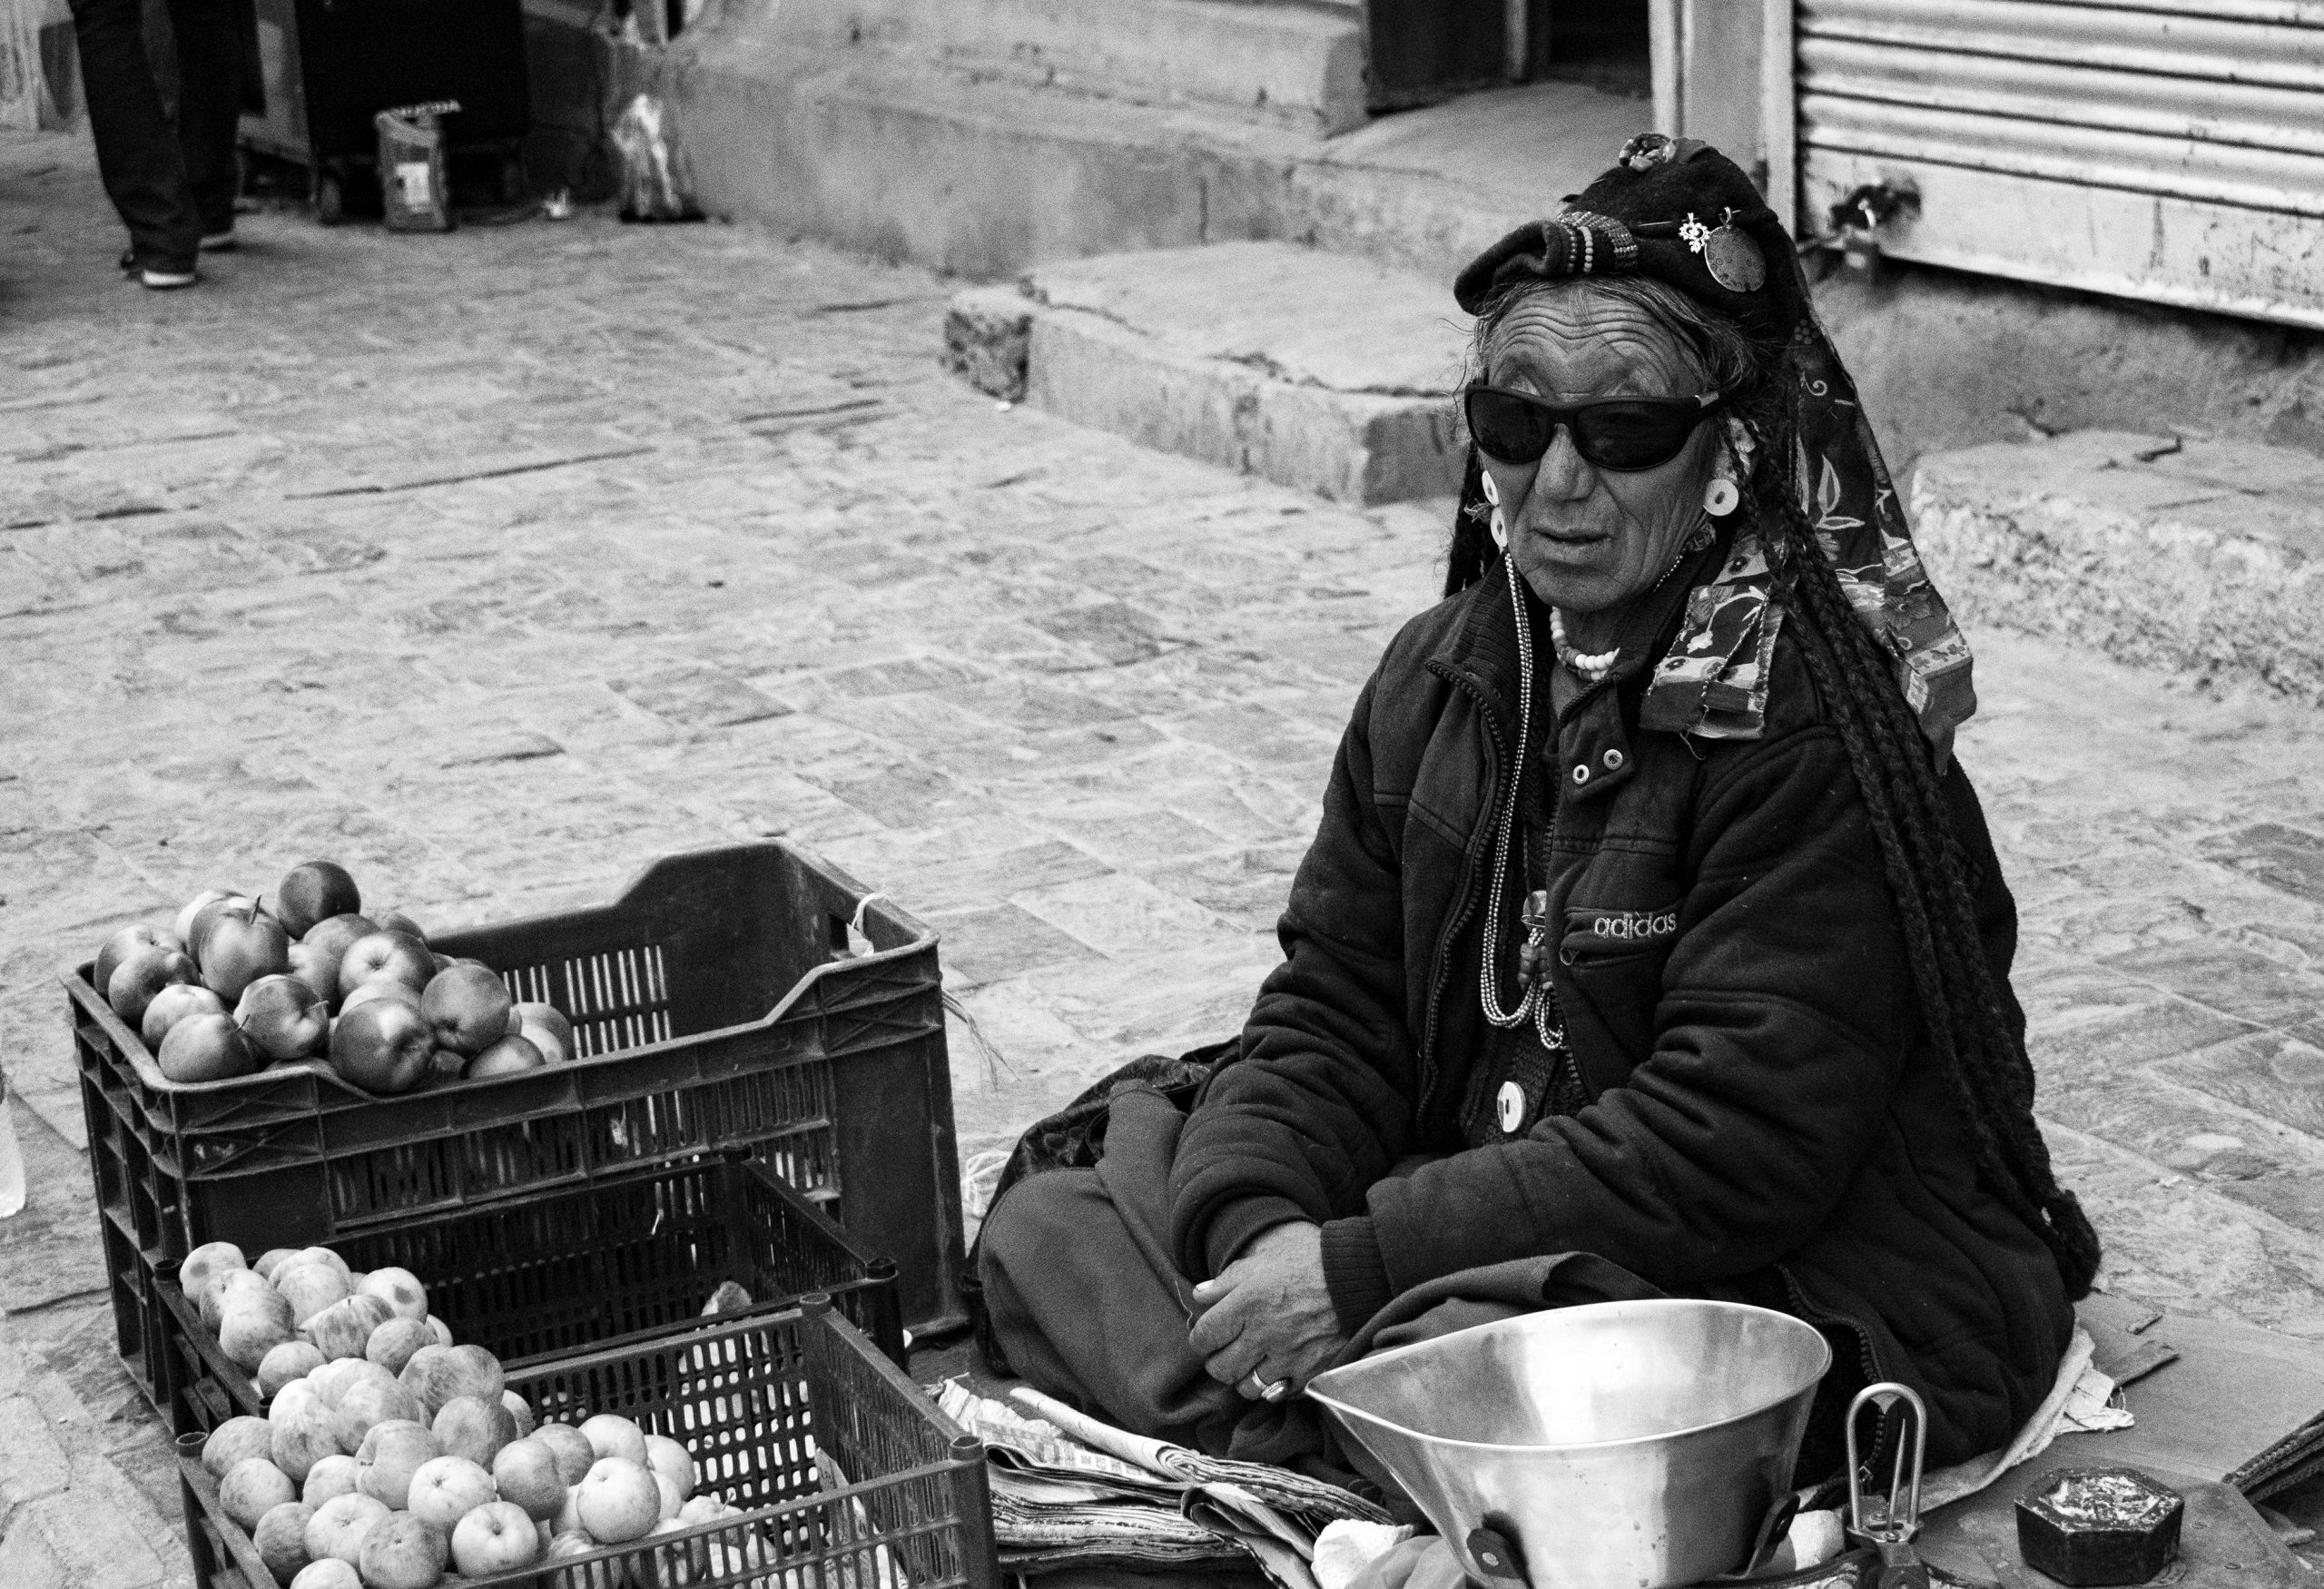 A lady selling fruits on the street